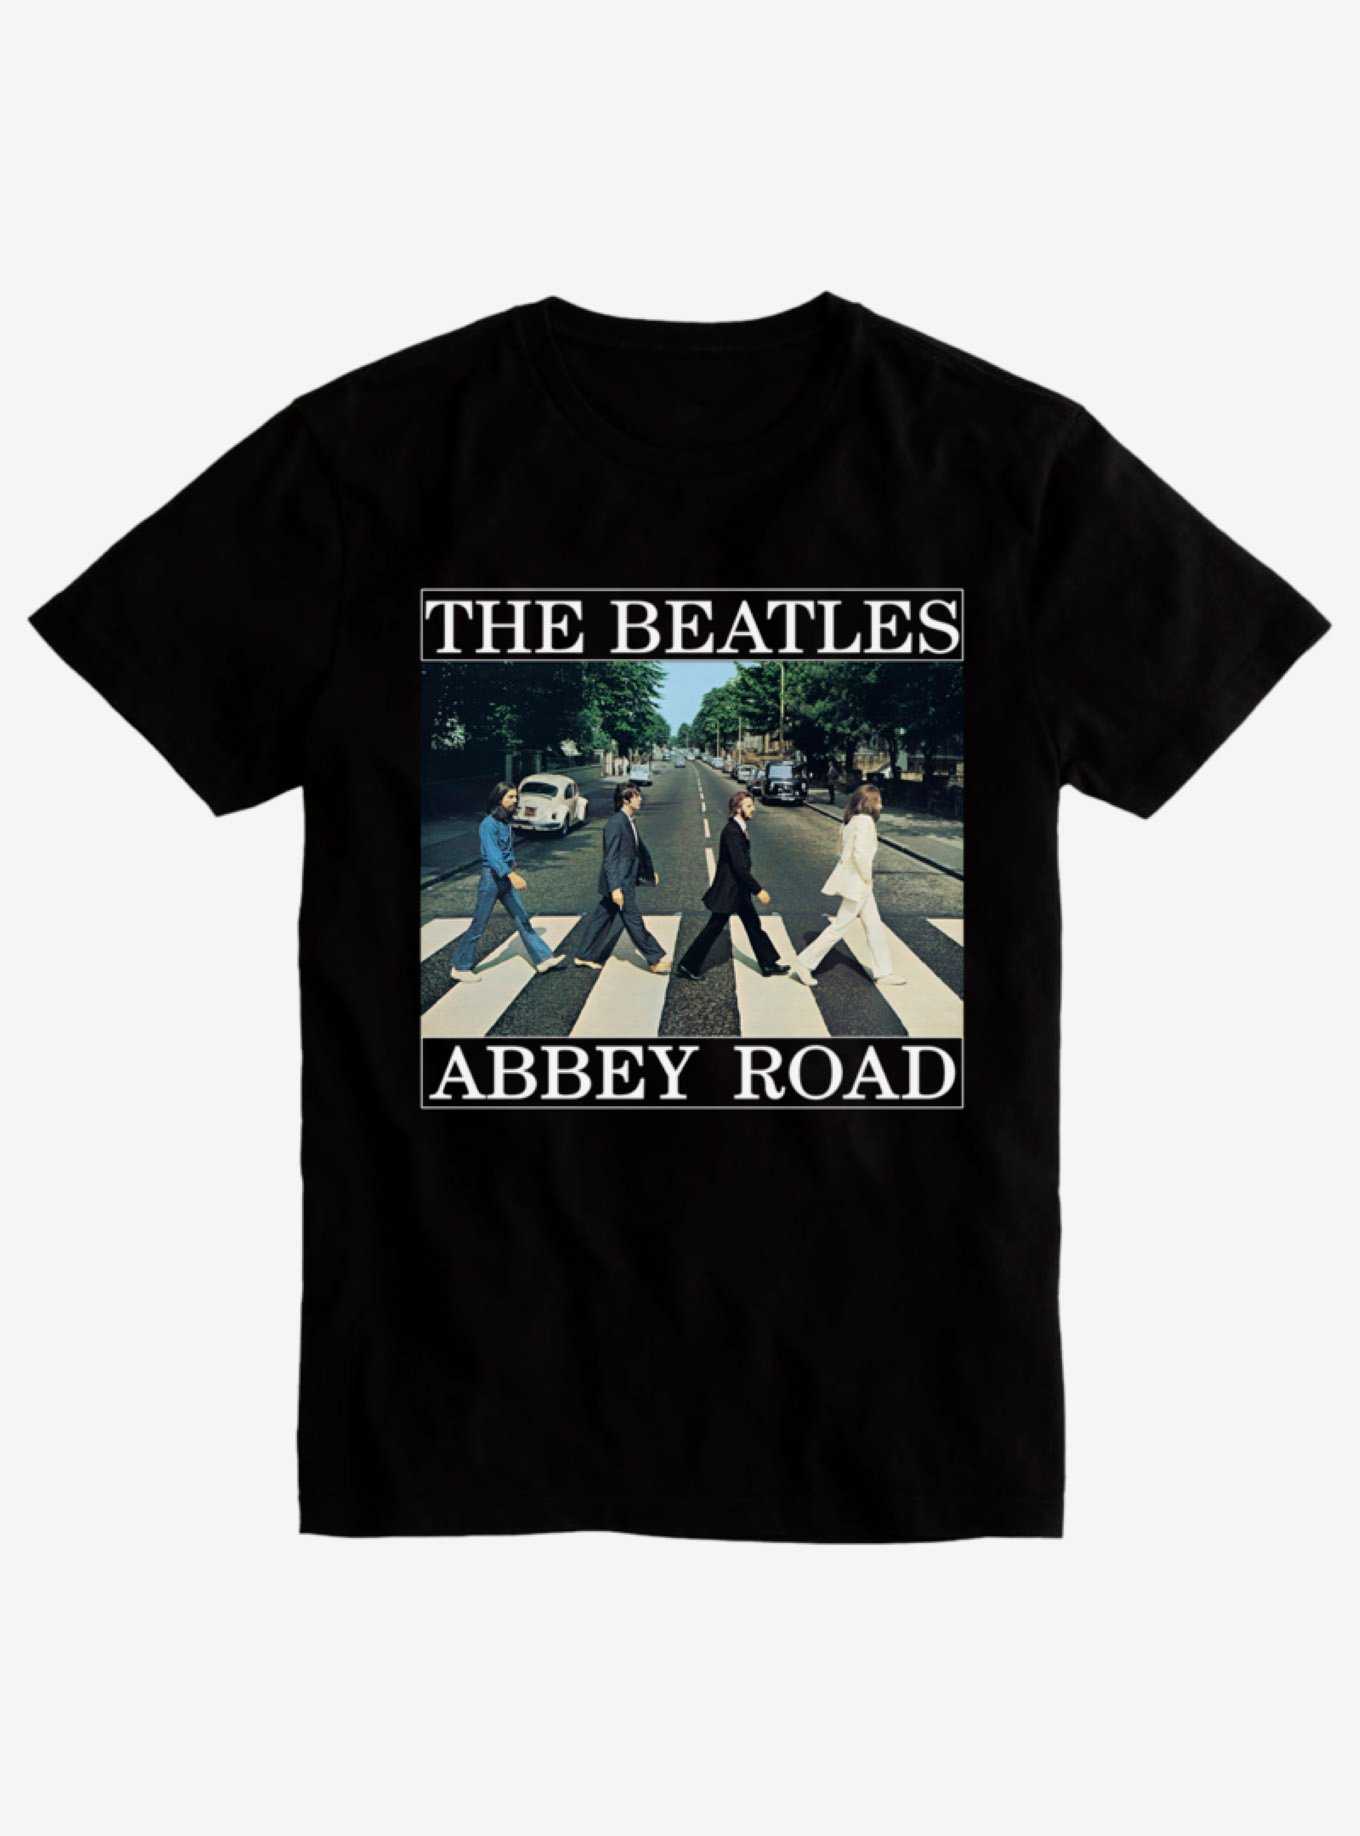 Abbey | Hot Beatles Album Road Cover The T-Shirt Topic